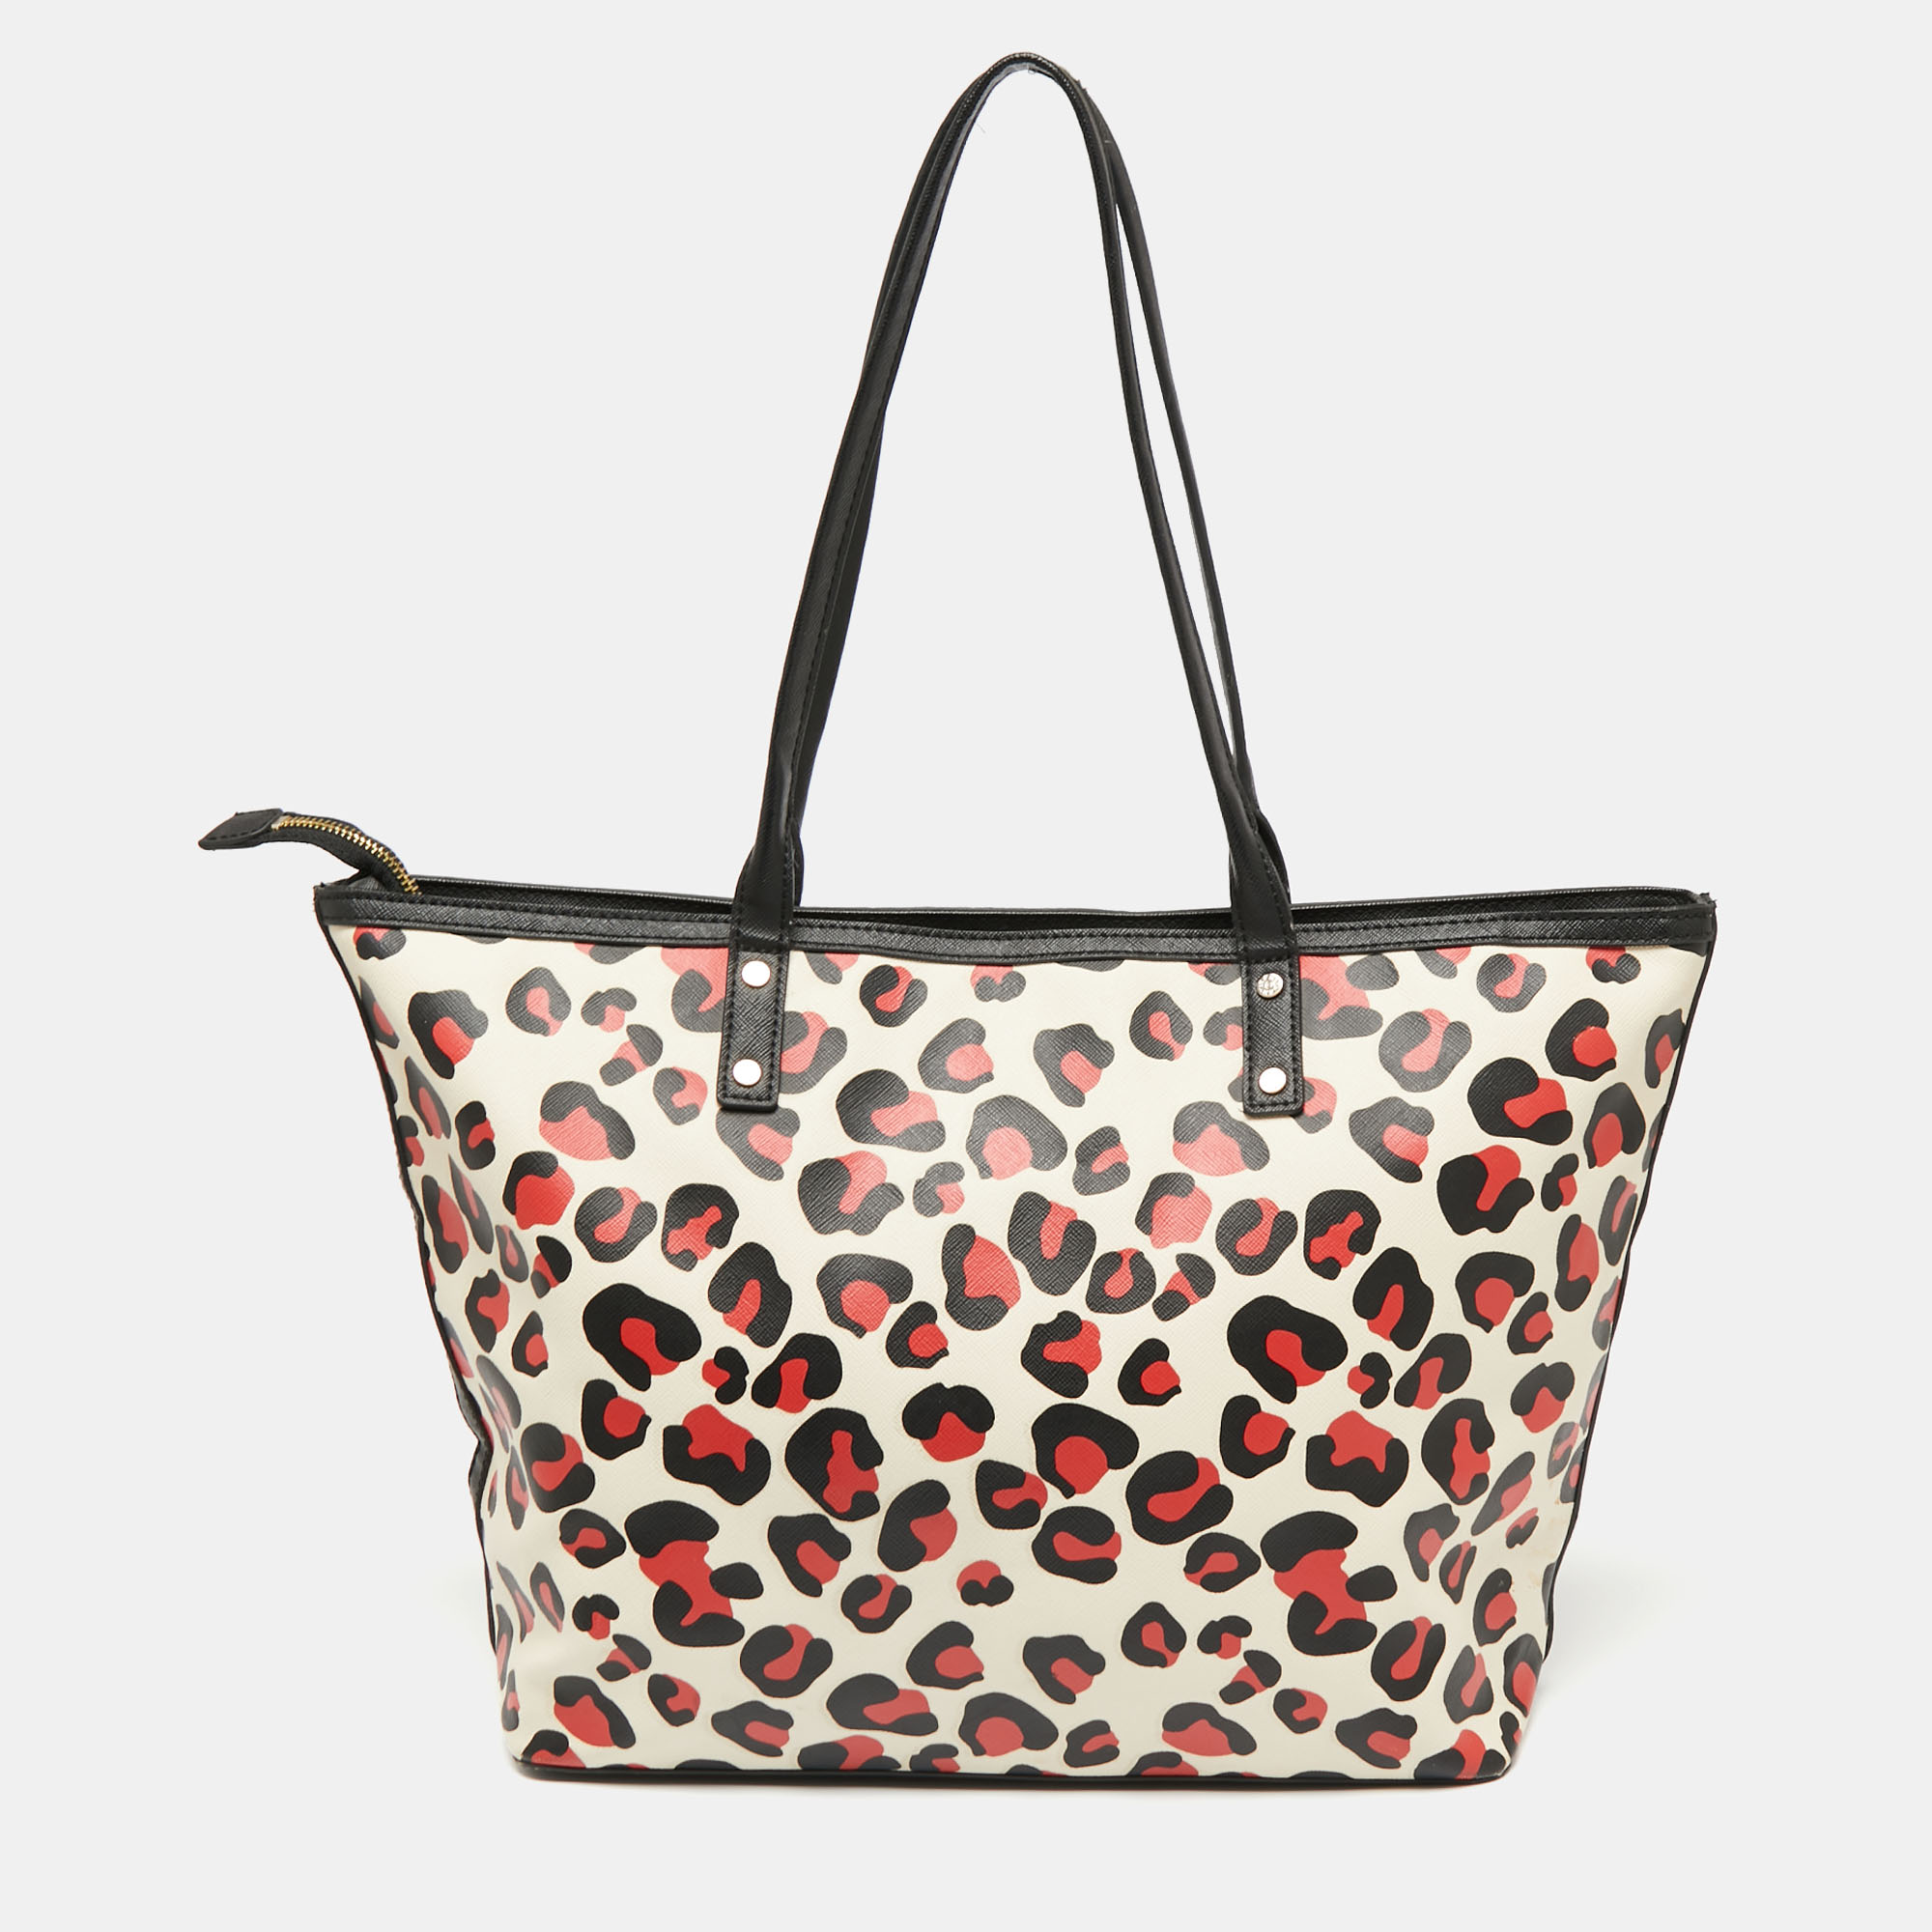 Dkny Black/Red Leopard Print Coated Canvas Zip Tote